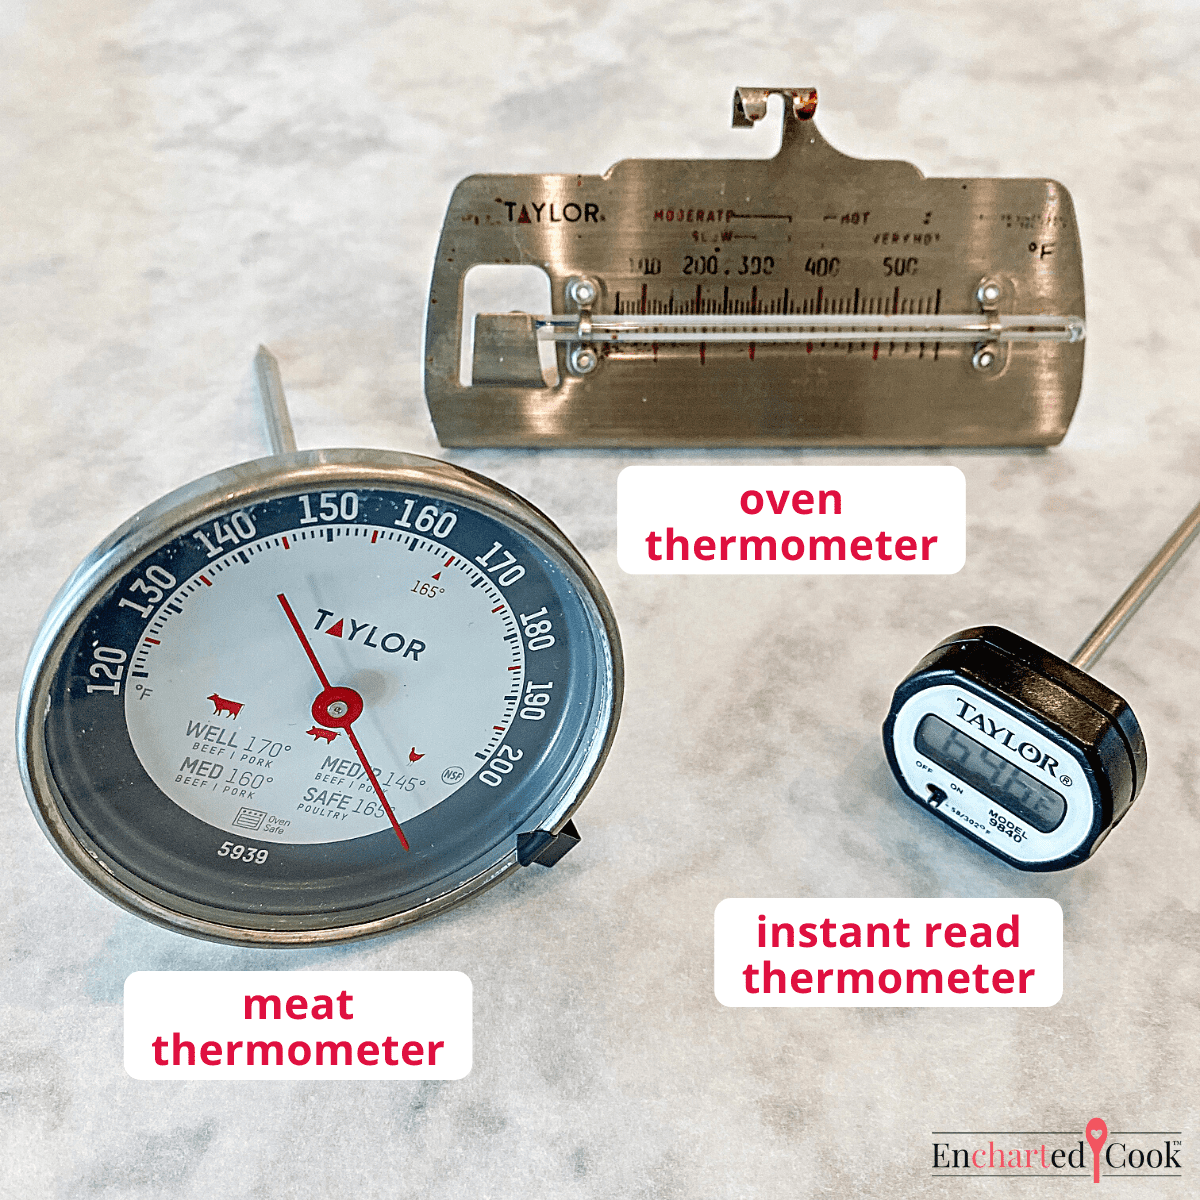 Types of thermometers for roasting meat, clockwise from top: oven thermometer, instant read thermometer, and a meat thermometer.